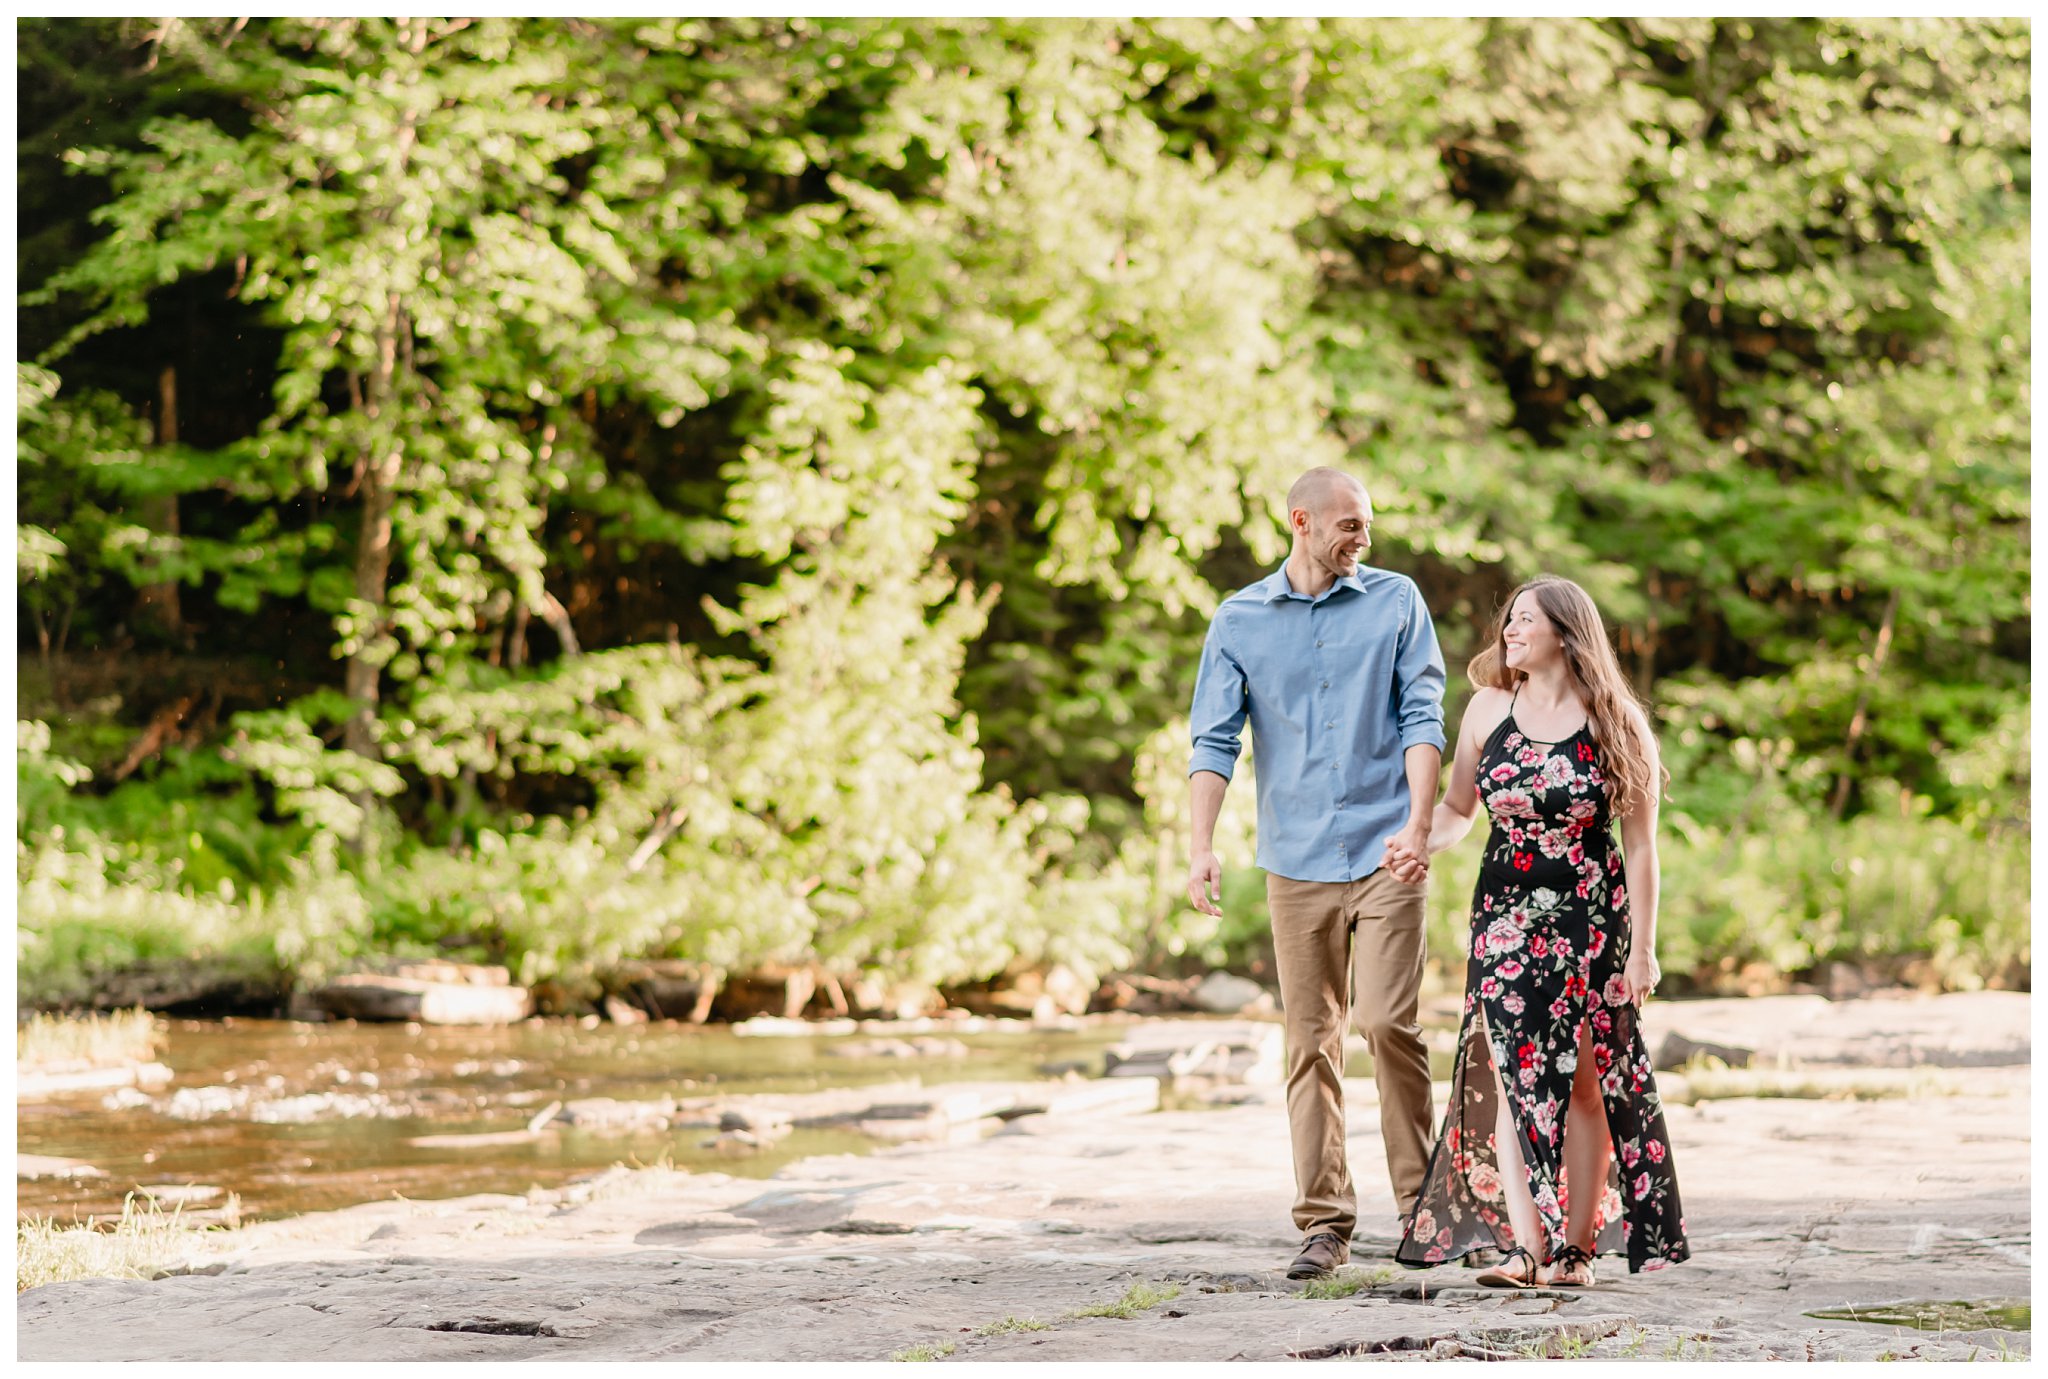 Salmon River Falls Engagement Session Joanna Young Photography_0014.jpg